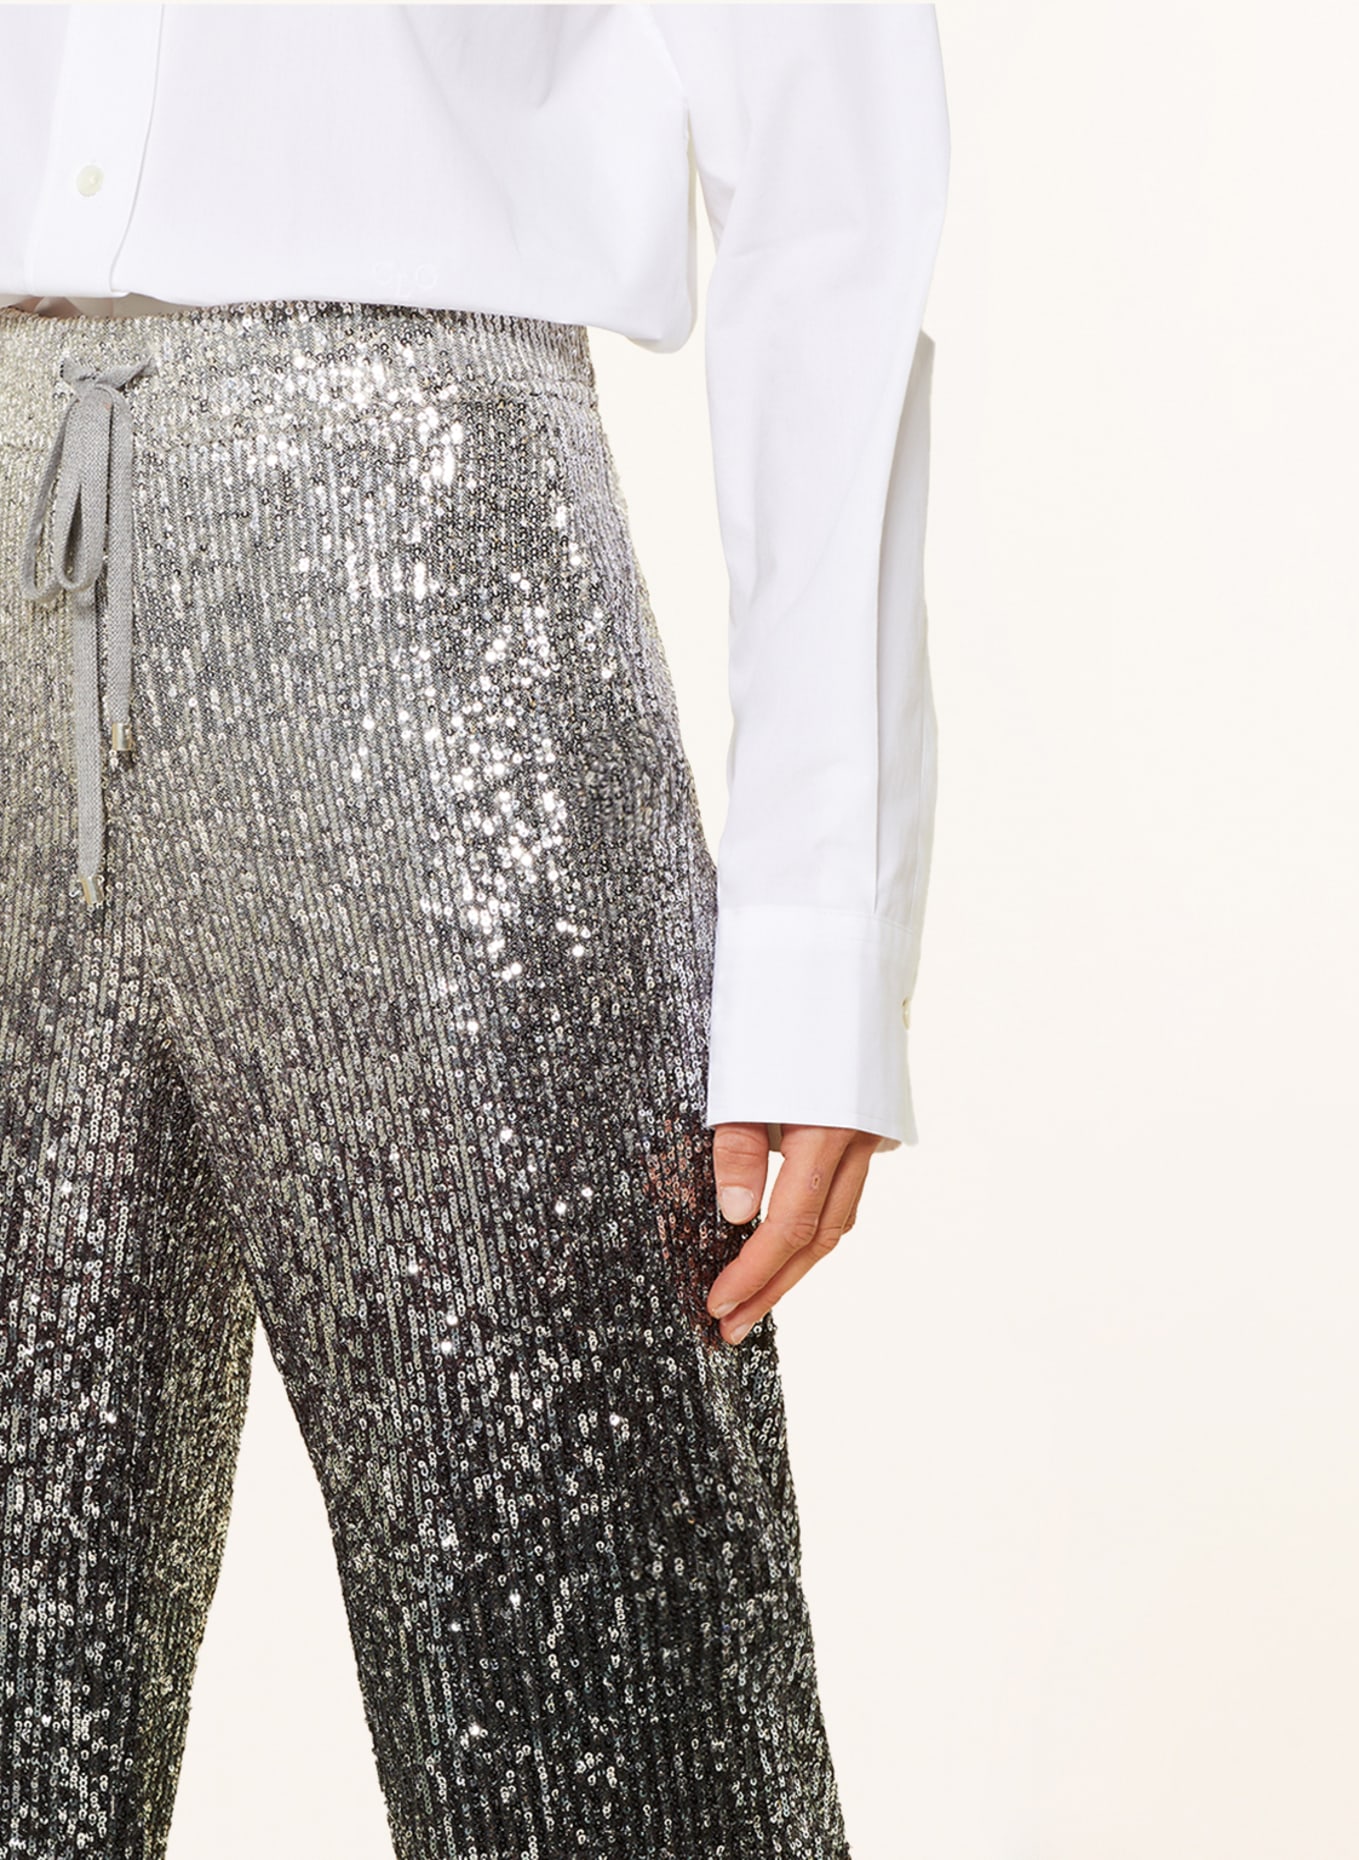 CAMBIO Trousers AVRIL with sequins, Color: GRAY/ BLACK/ SILVER (Image 5)